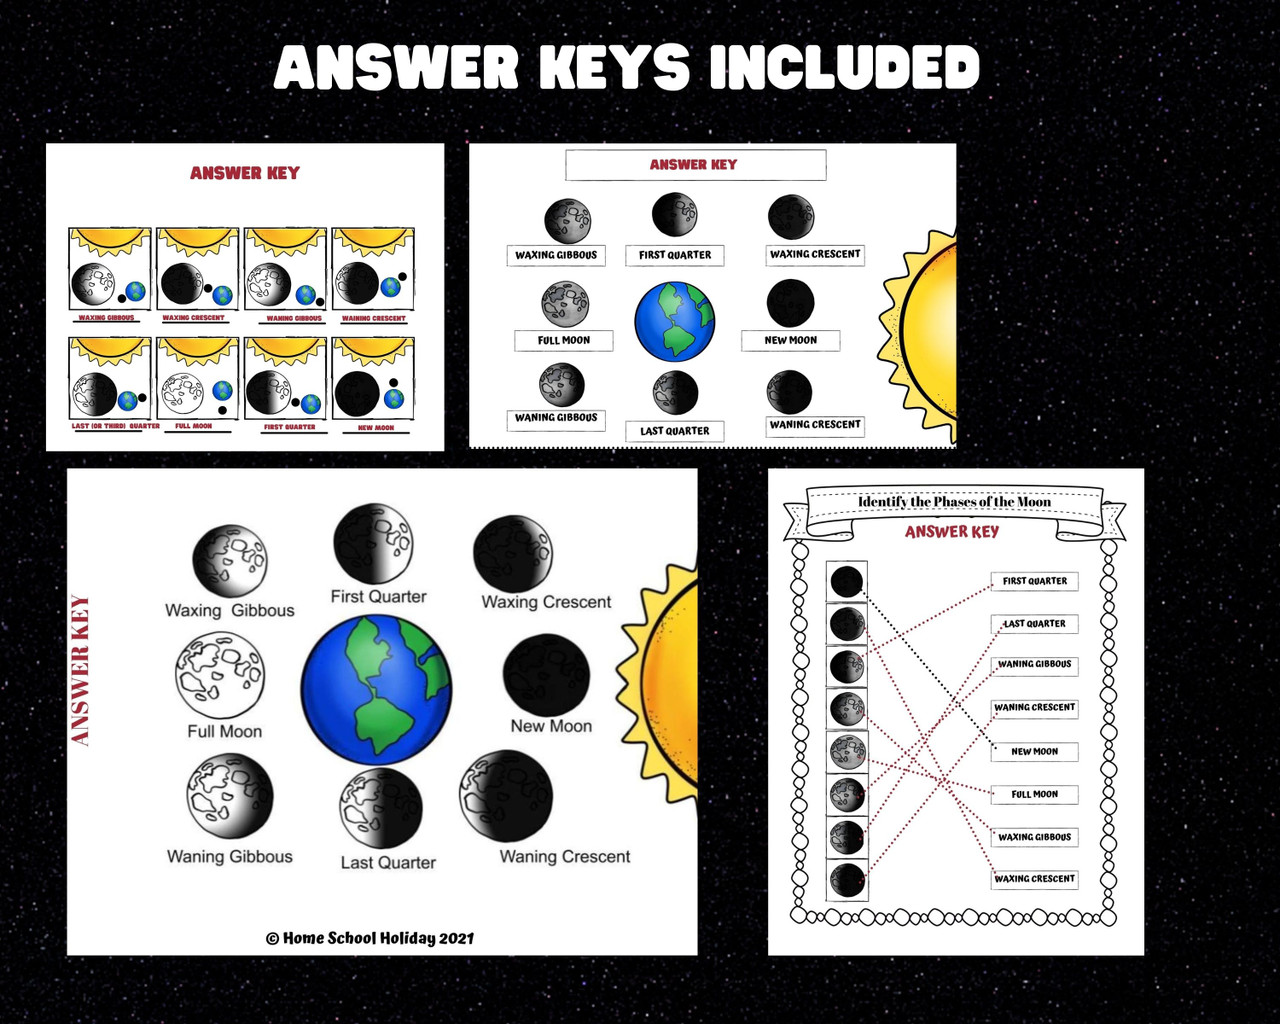 Phases of the Moon worksheets pdf